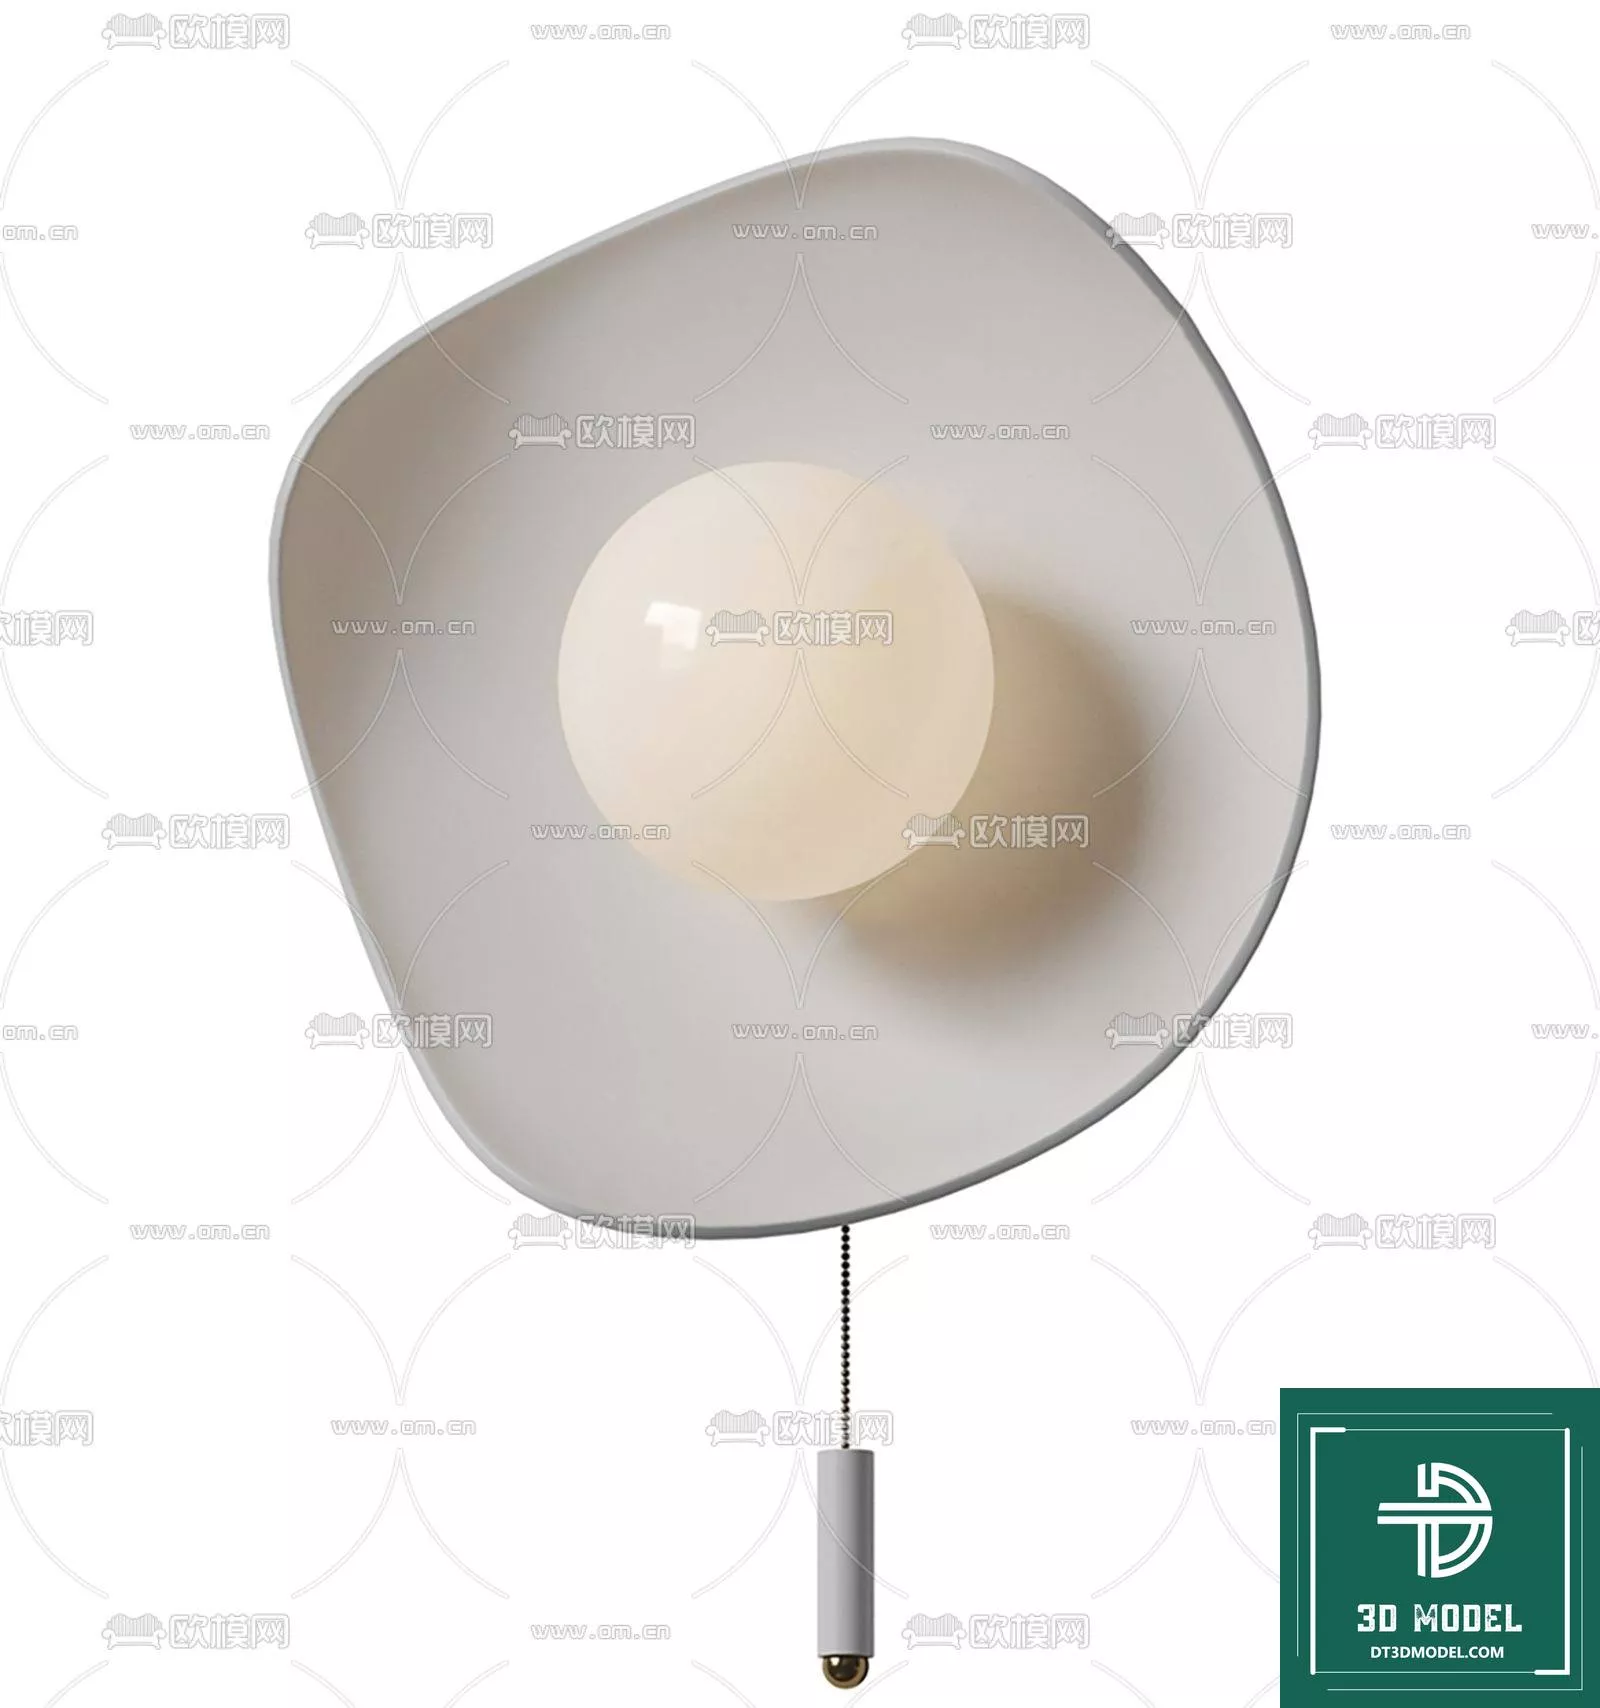 MODERN WALL LAMP - SKETCHUP 3D MODEL - VRAY OR ENSCAPE - ID16045